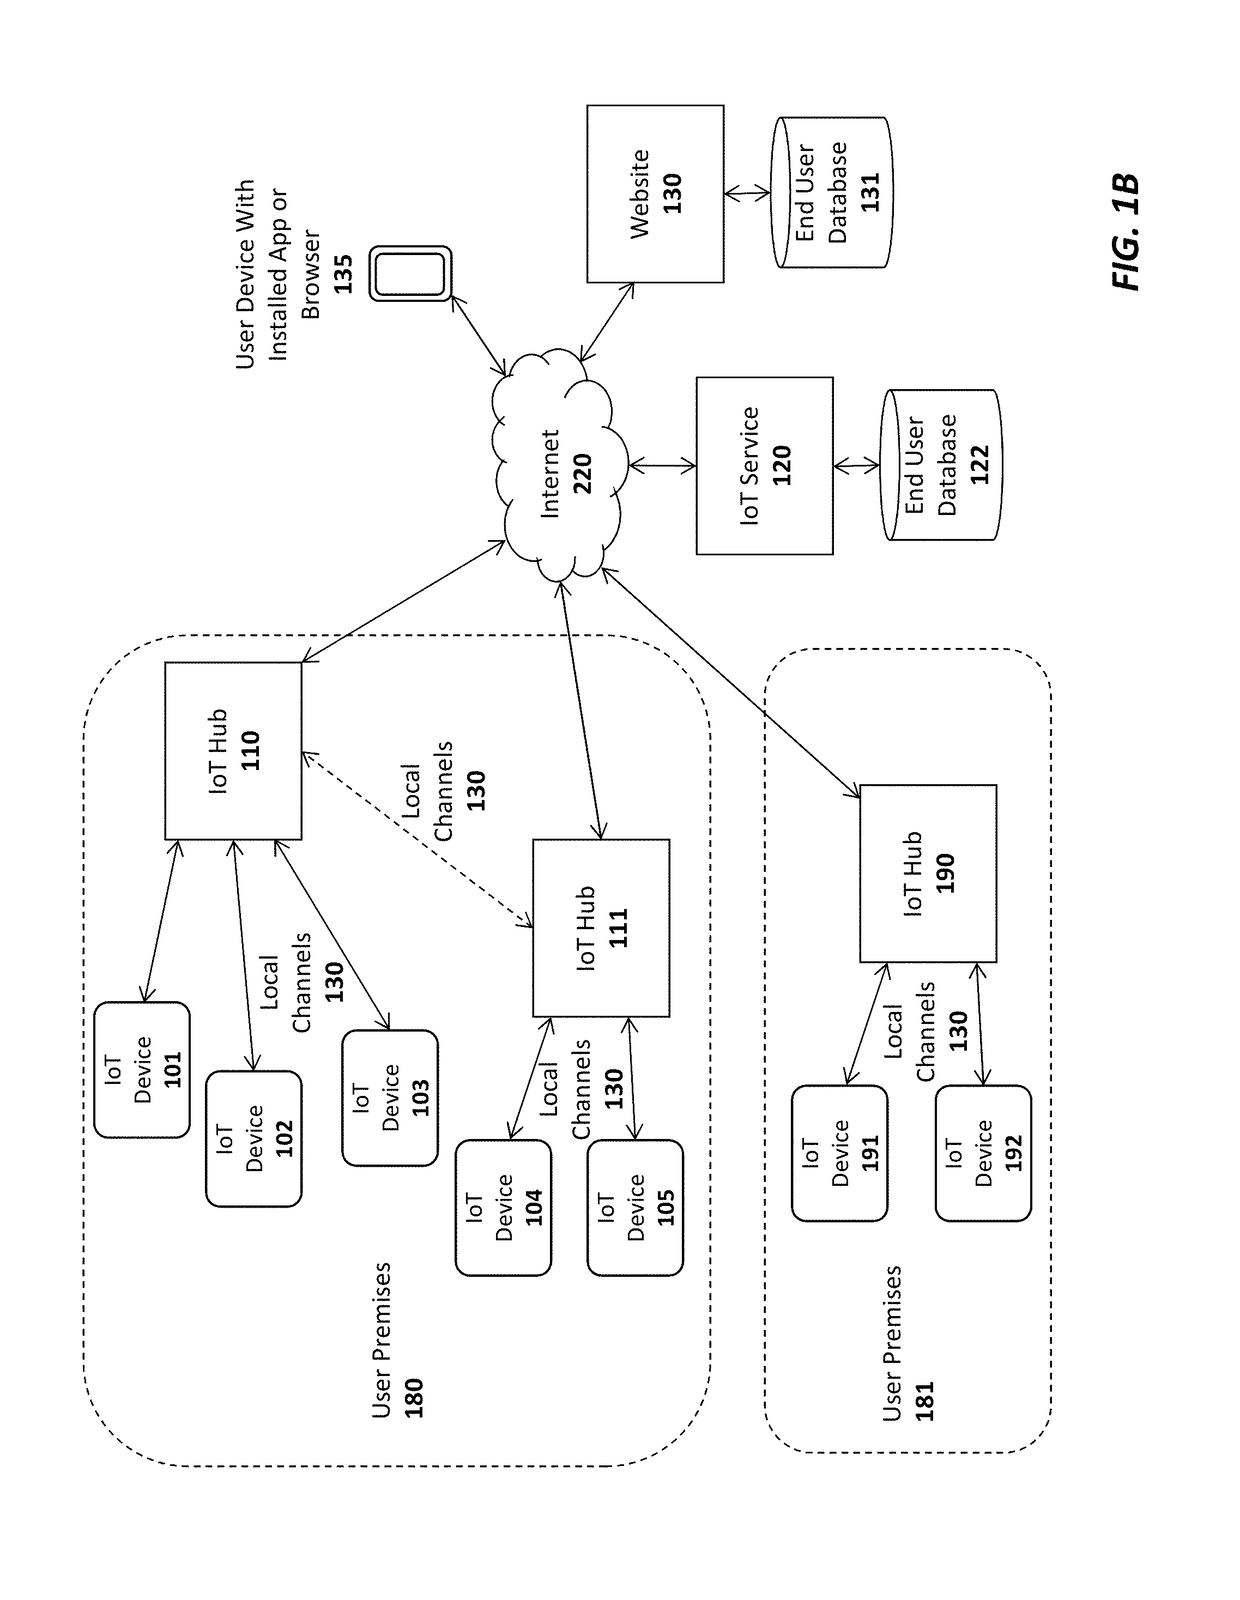 Internet of things (IOT) system and method for monitoring and collecting data in a beverage dispensing system